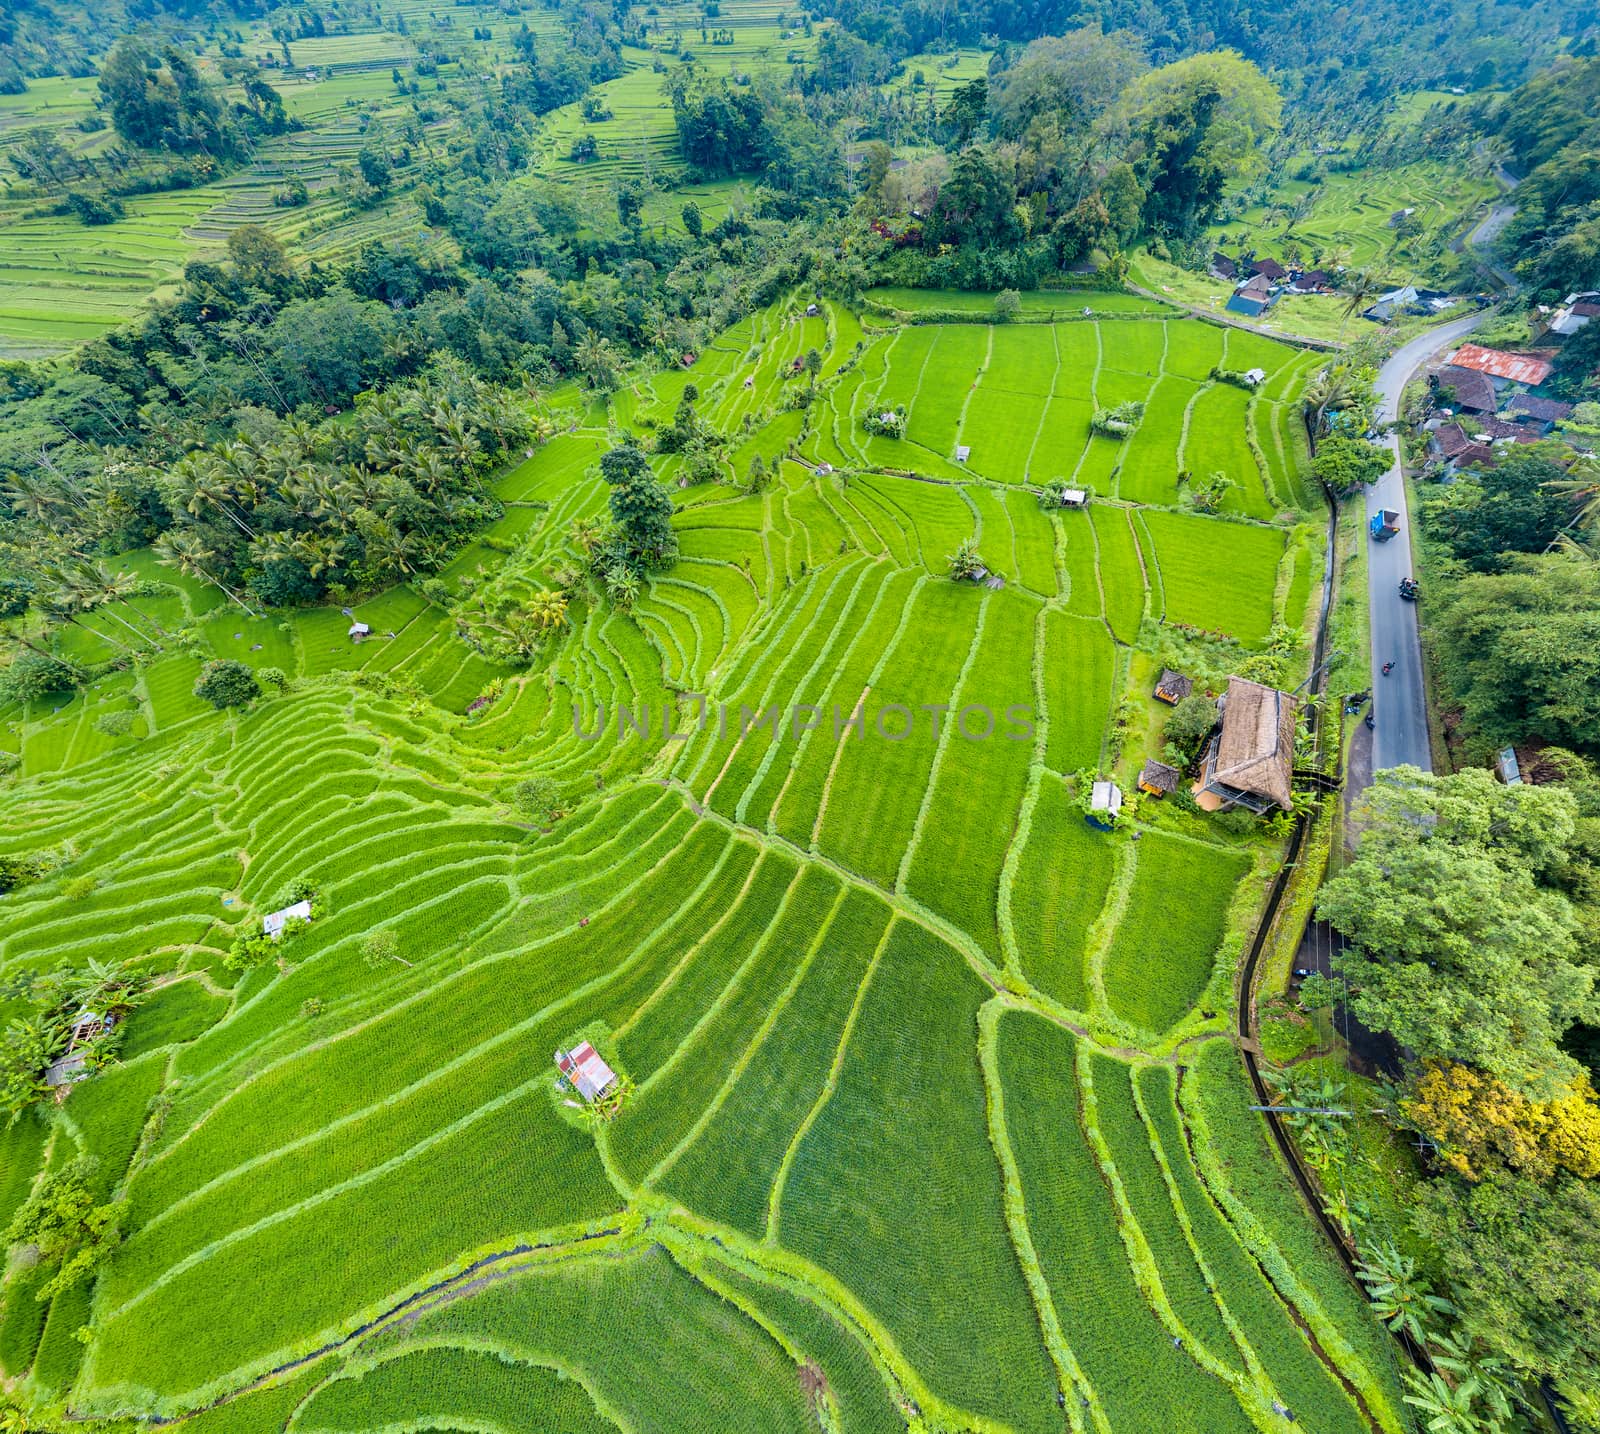 Aerial view of rice terraces in Bali, Indonesia by dutourdumonde